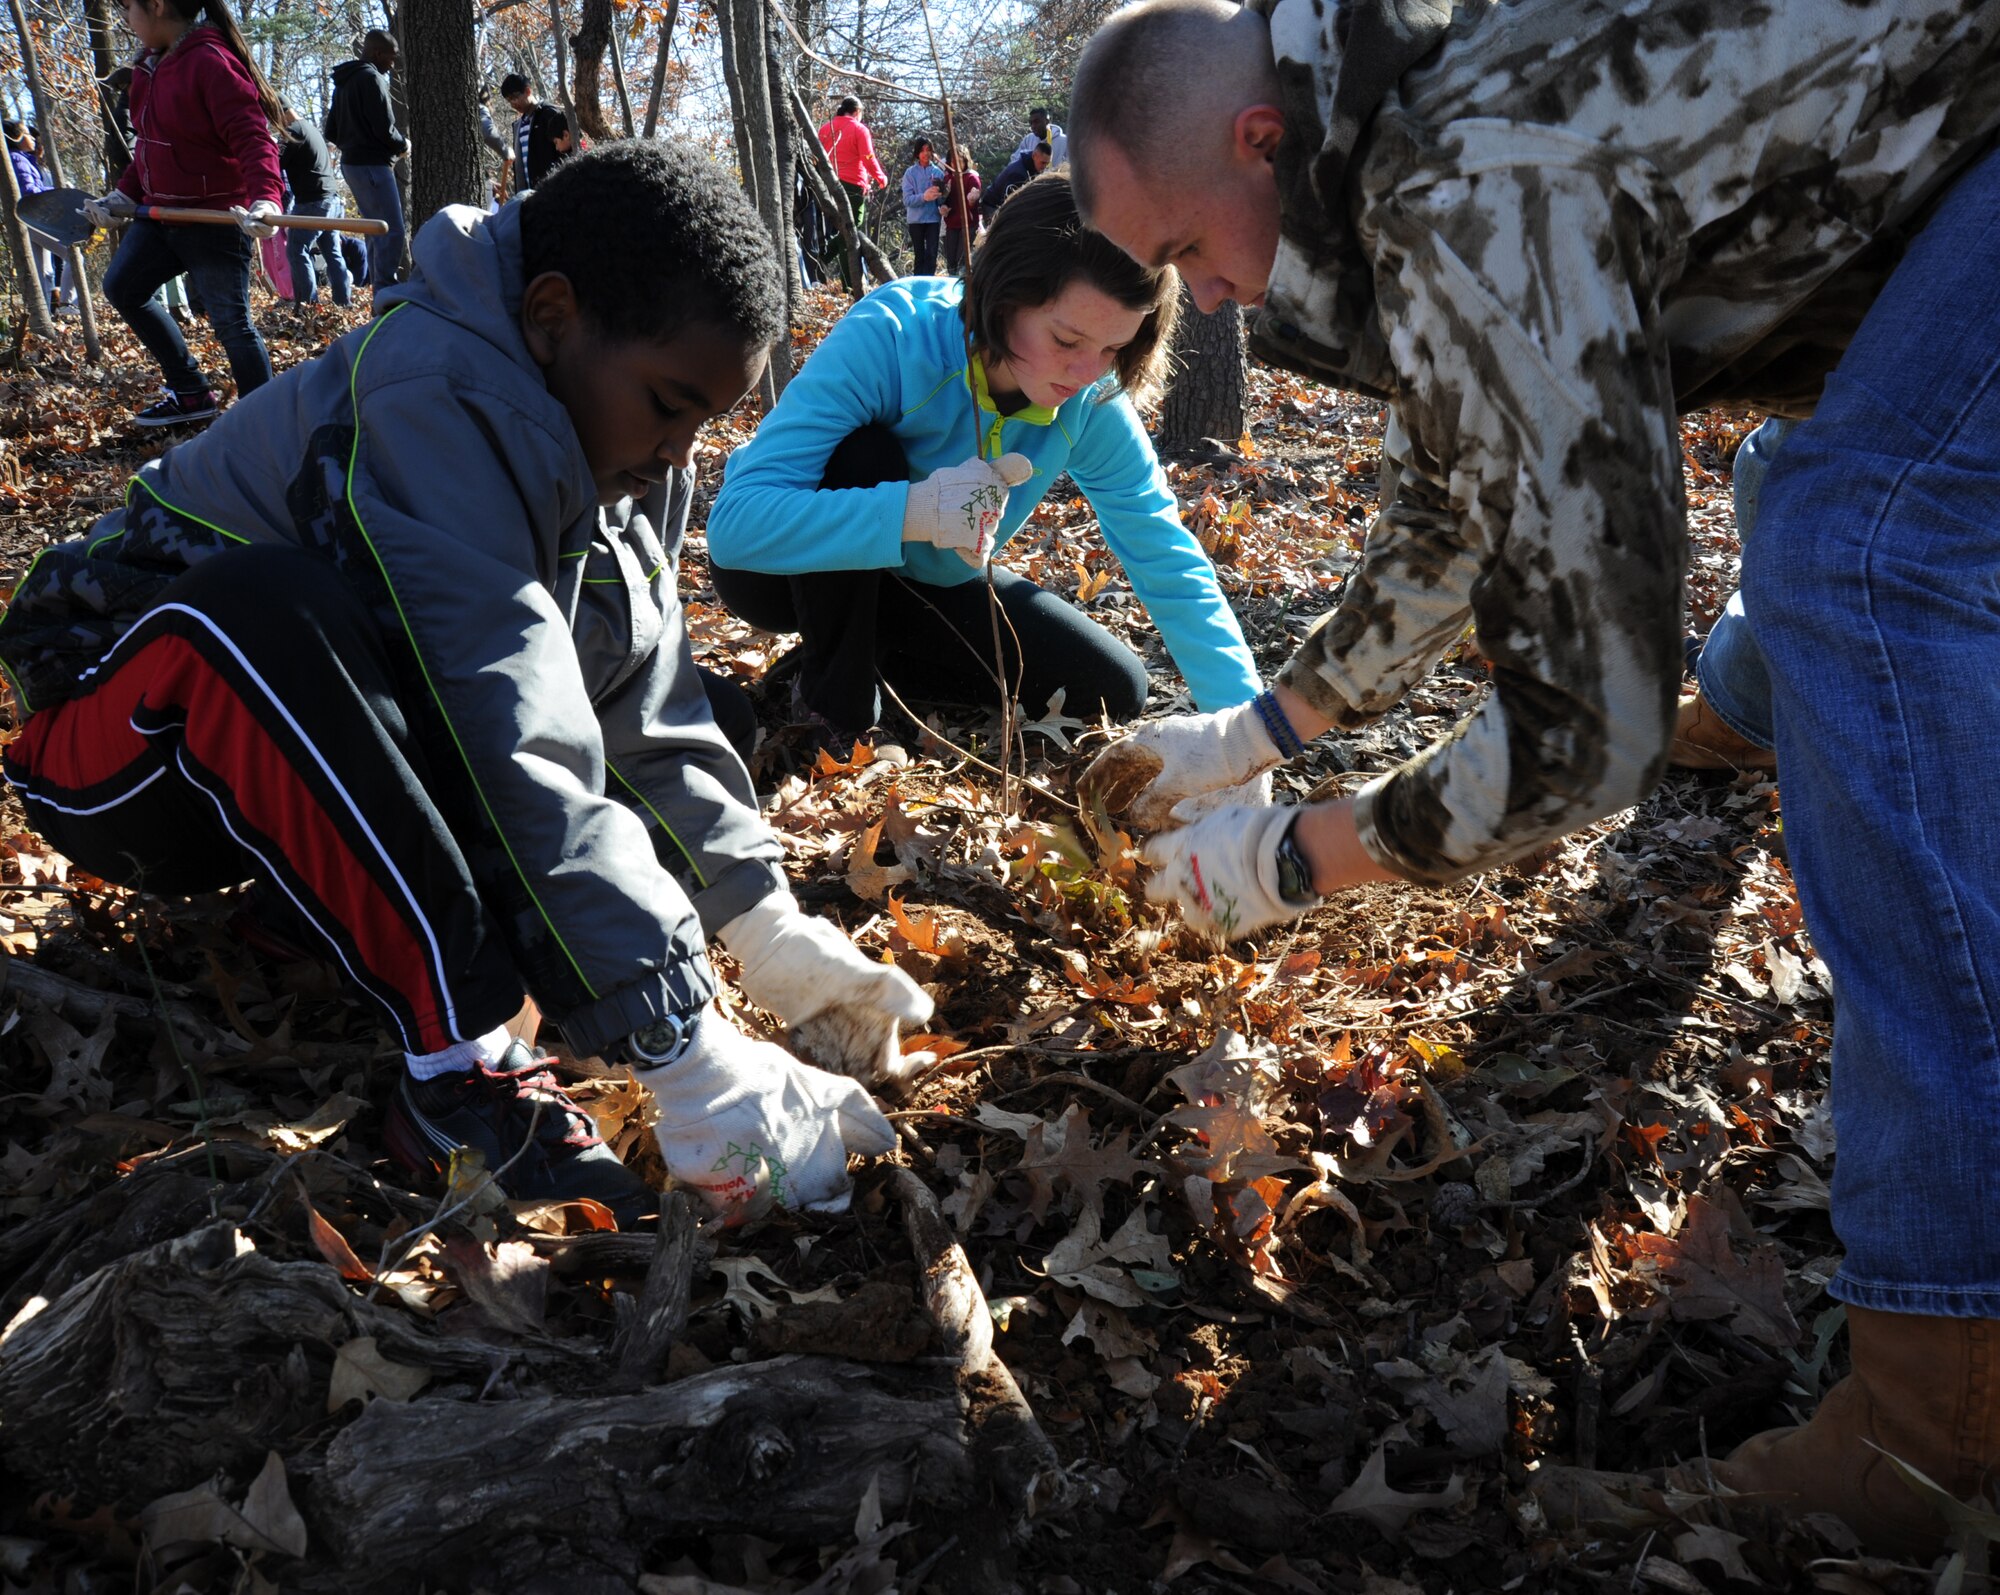 Members of the U.S. Air Force Honor Guard Drill Team and students at Belvedere Elementary School plant a tree at Belvedere Park near the school in Falls Church, Va., Nov. 26, 2012.  The Drill Team has a close relationship with Belvedere Elementary and its students. (U.S. Air Force photo/Staff Sgt. Torey Griffith)